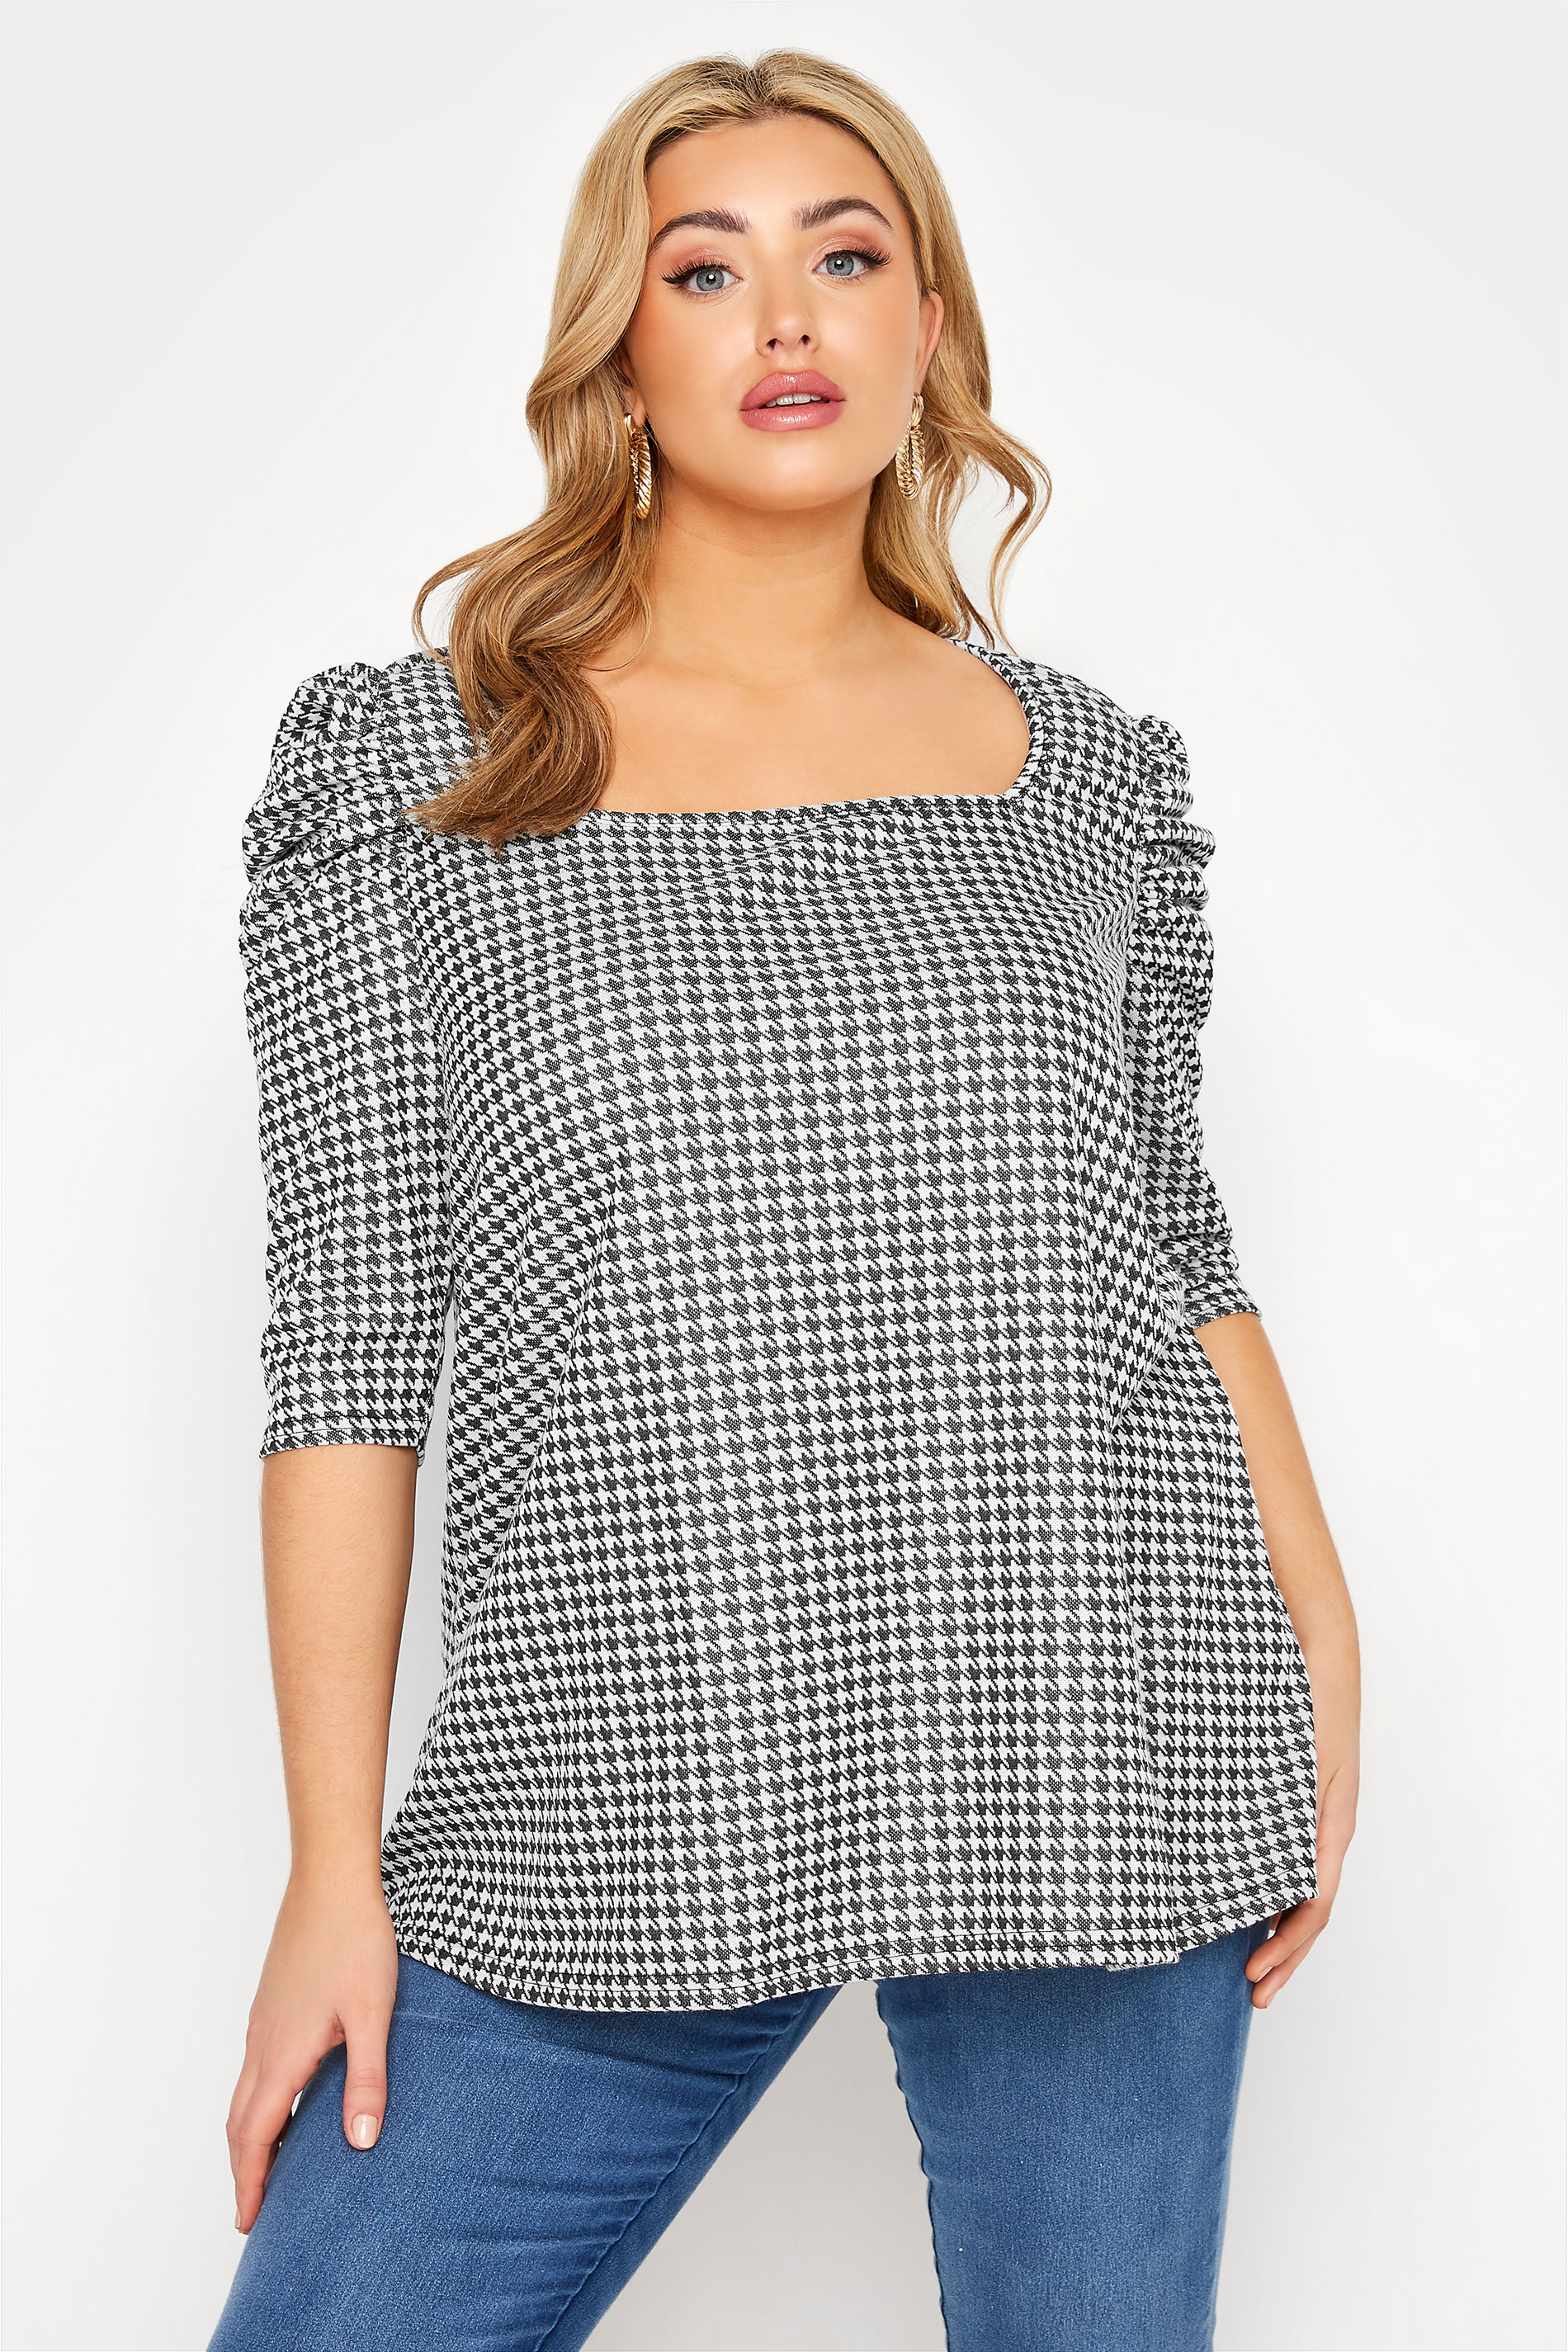 LIMITED COLLECTION Plus Size Black Dogtooth Check Puff Sleeve Top | Yours Clothing 1